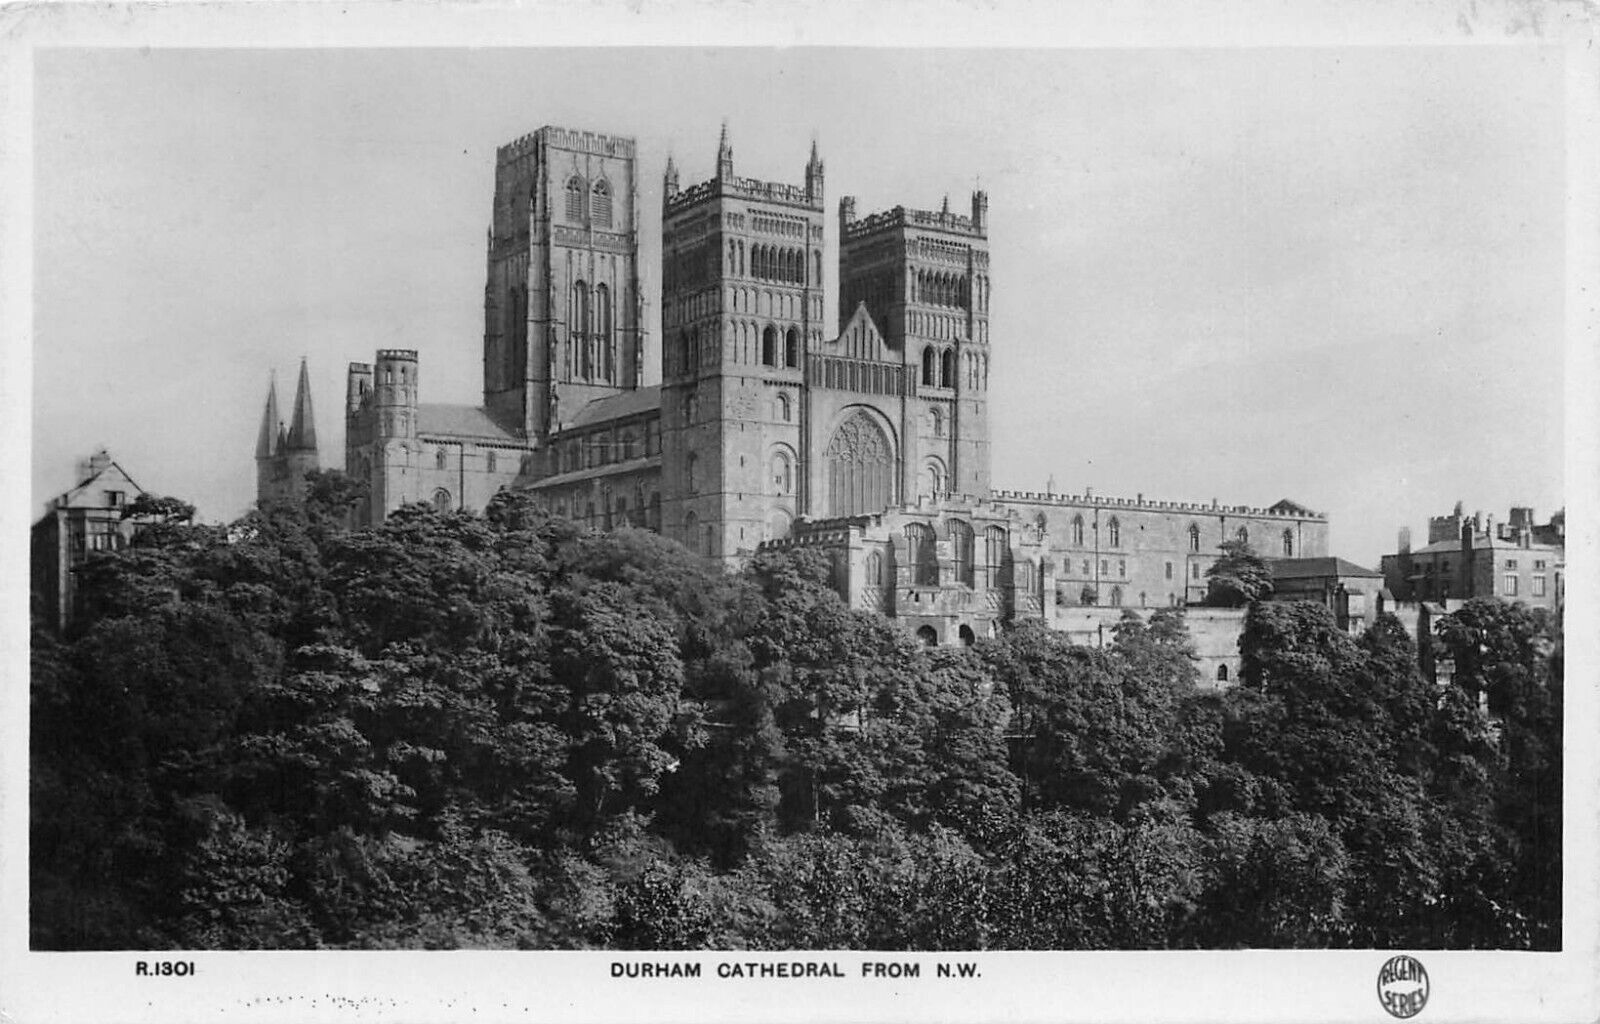 House Clearance - DURHAM CATHEDRAL FROM N.W ~ AN OLD REAL PHOTO POSTCARD #2231280